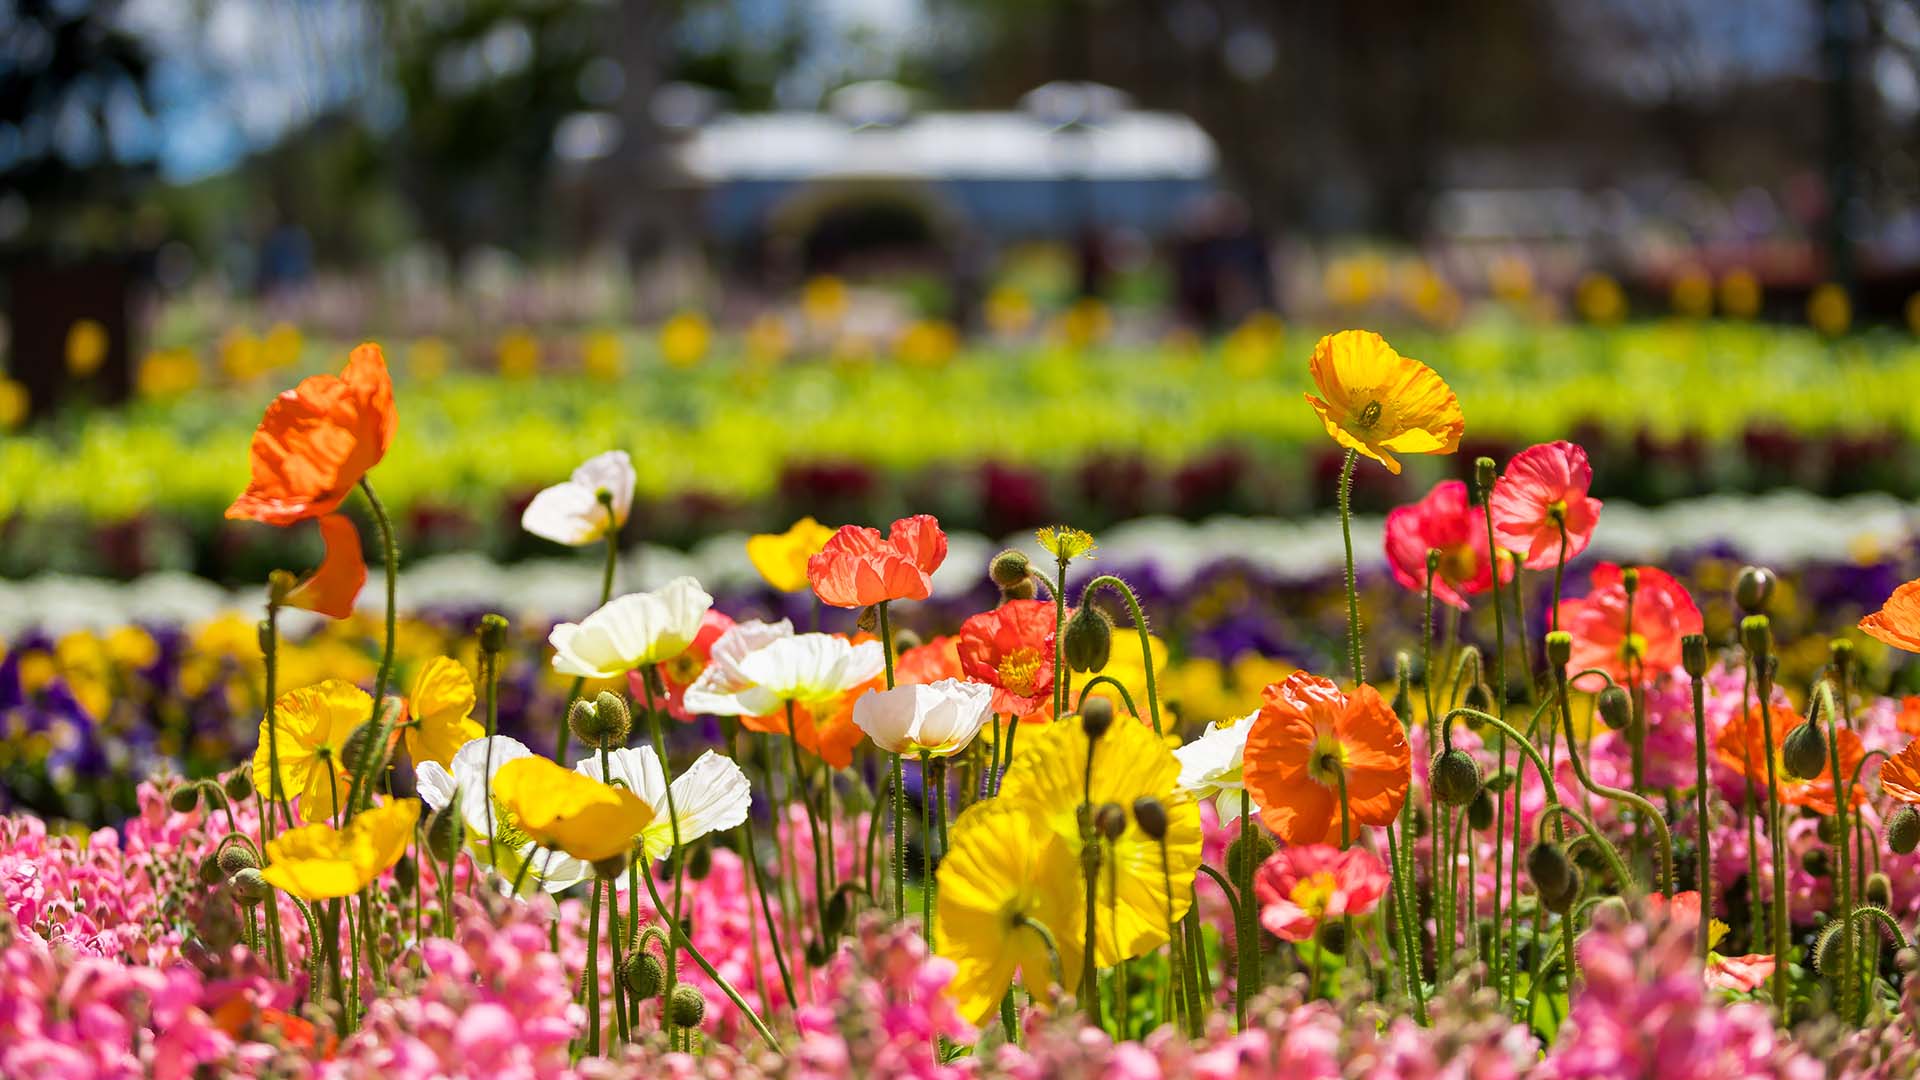 Toowoomba's Carnival of Flowers Has Locked in Its 2023 Dates After a Record-Breaking 2022 Festival